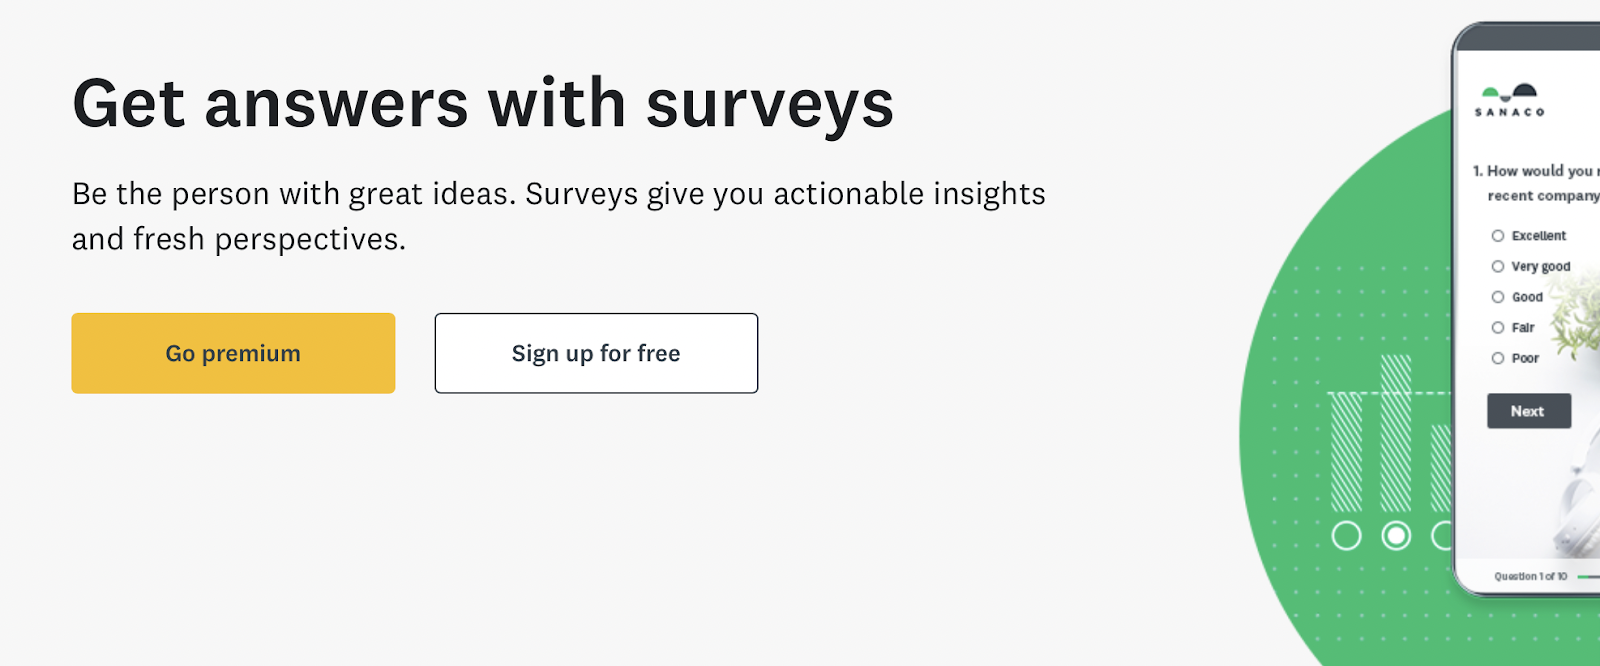 The heading says "Get answers with surveys" and the text underneath says "Be the person with great ideas. Surveys give you actionable insights and fresh perspectives."